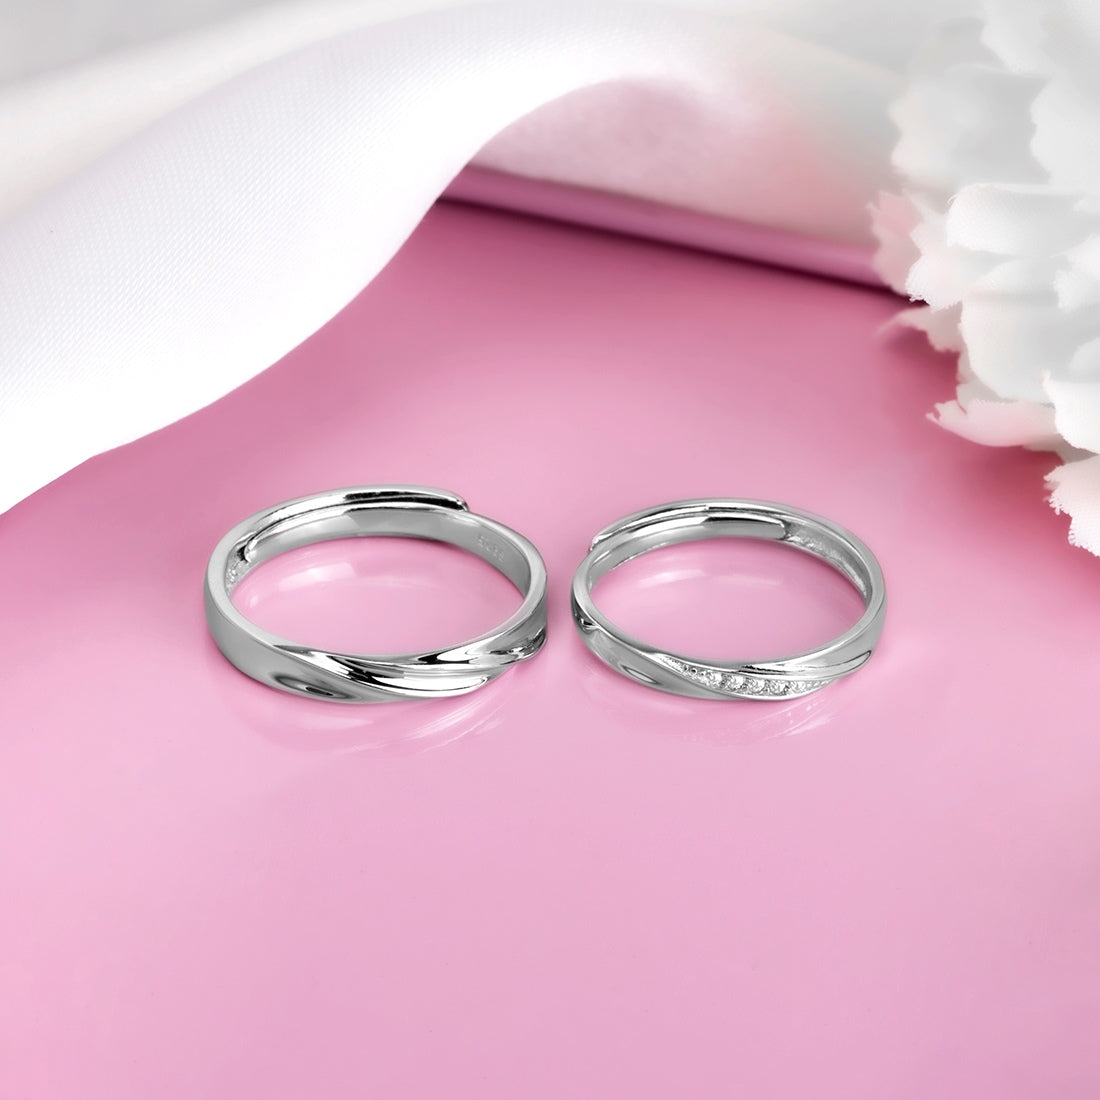 You & Me 925 Sterling Silver Couple Ring (Adjustable)